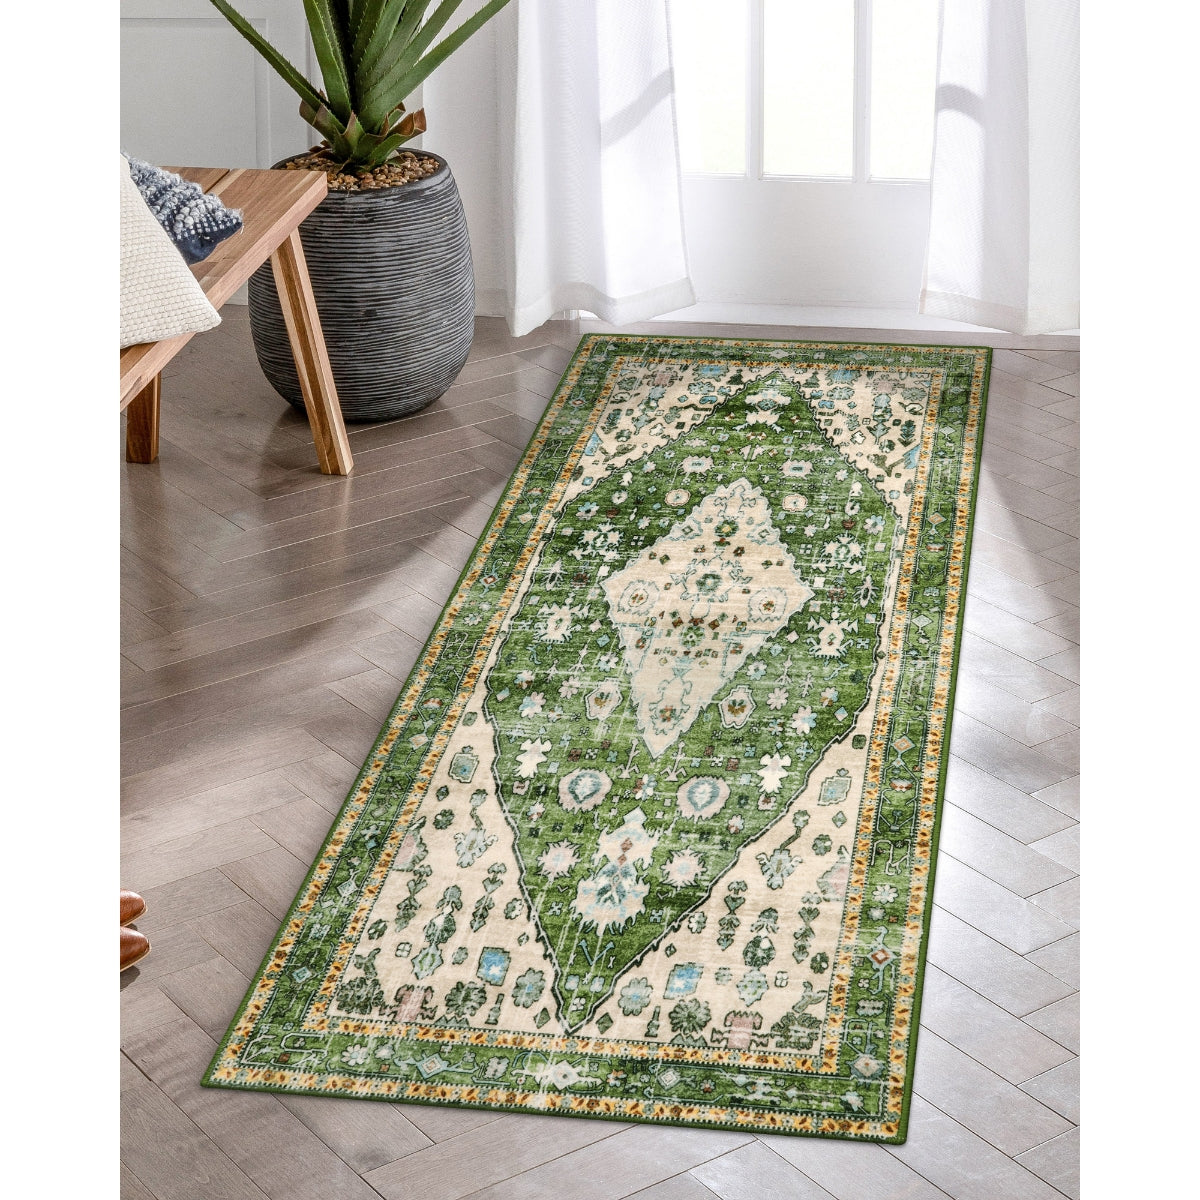 Morebes Boho Tribal Kitchen Runner Rug Washable,2x4 Rug Non-Slip,Green  Bohemian Hallway Rug,Small Front Door Rug,Distressed Soft Throw Low-Pile  Carpet